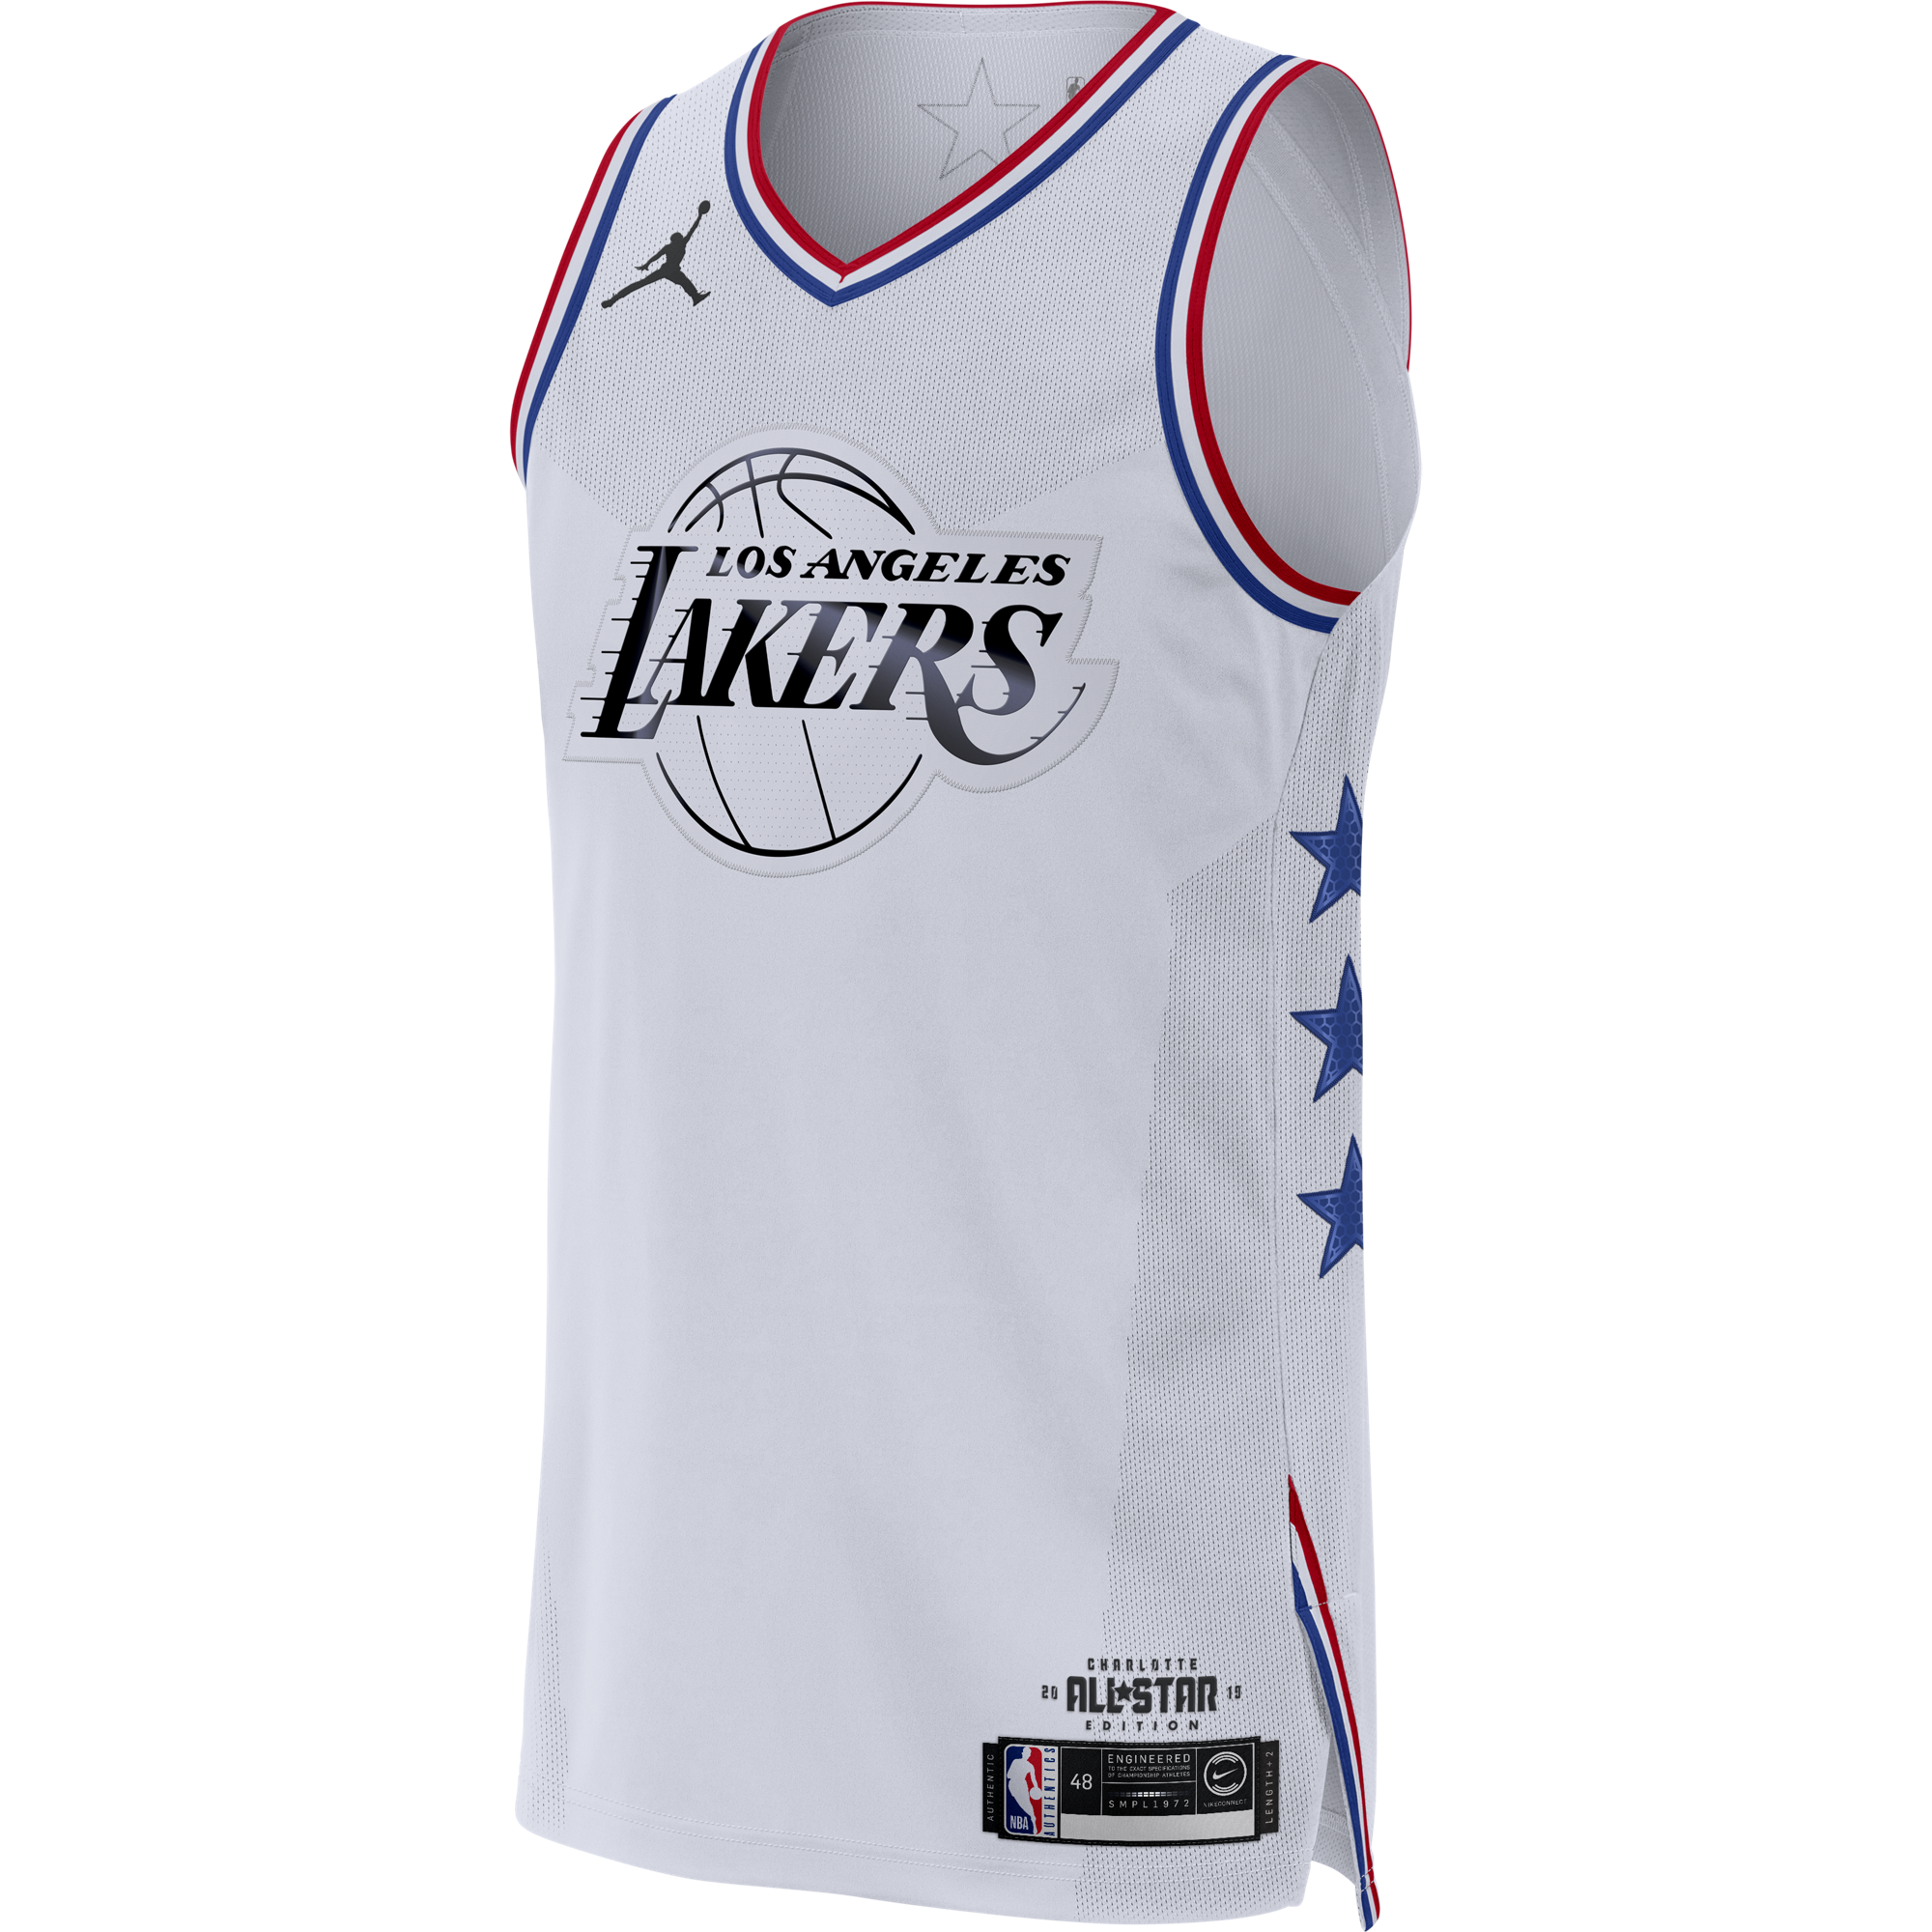 lebron james all star 2019 jersey